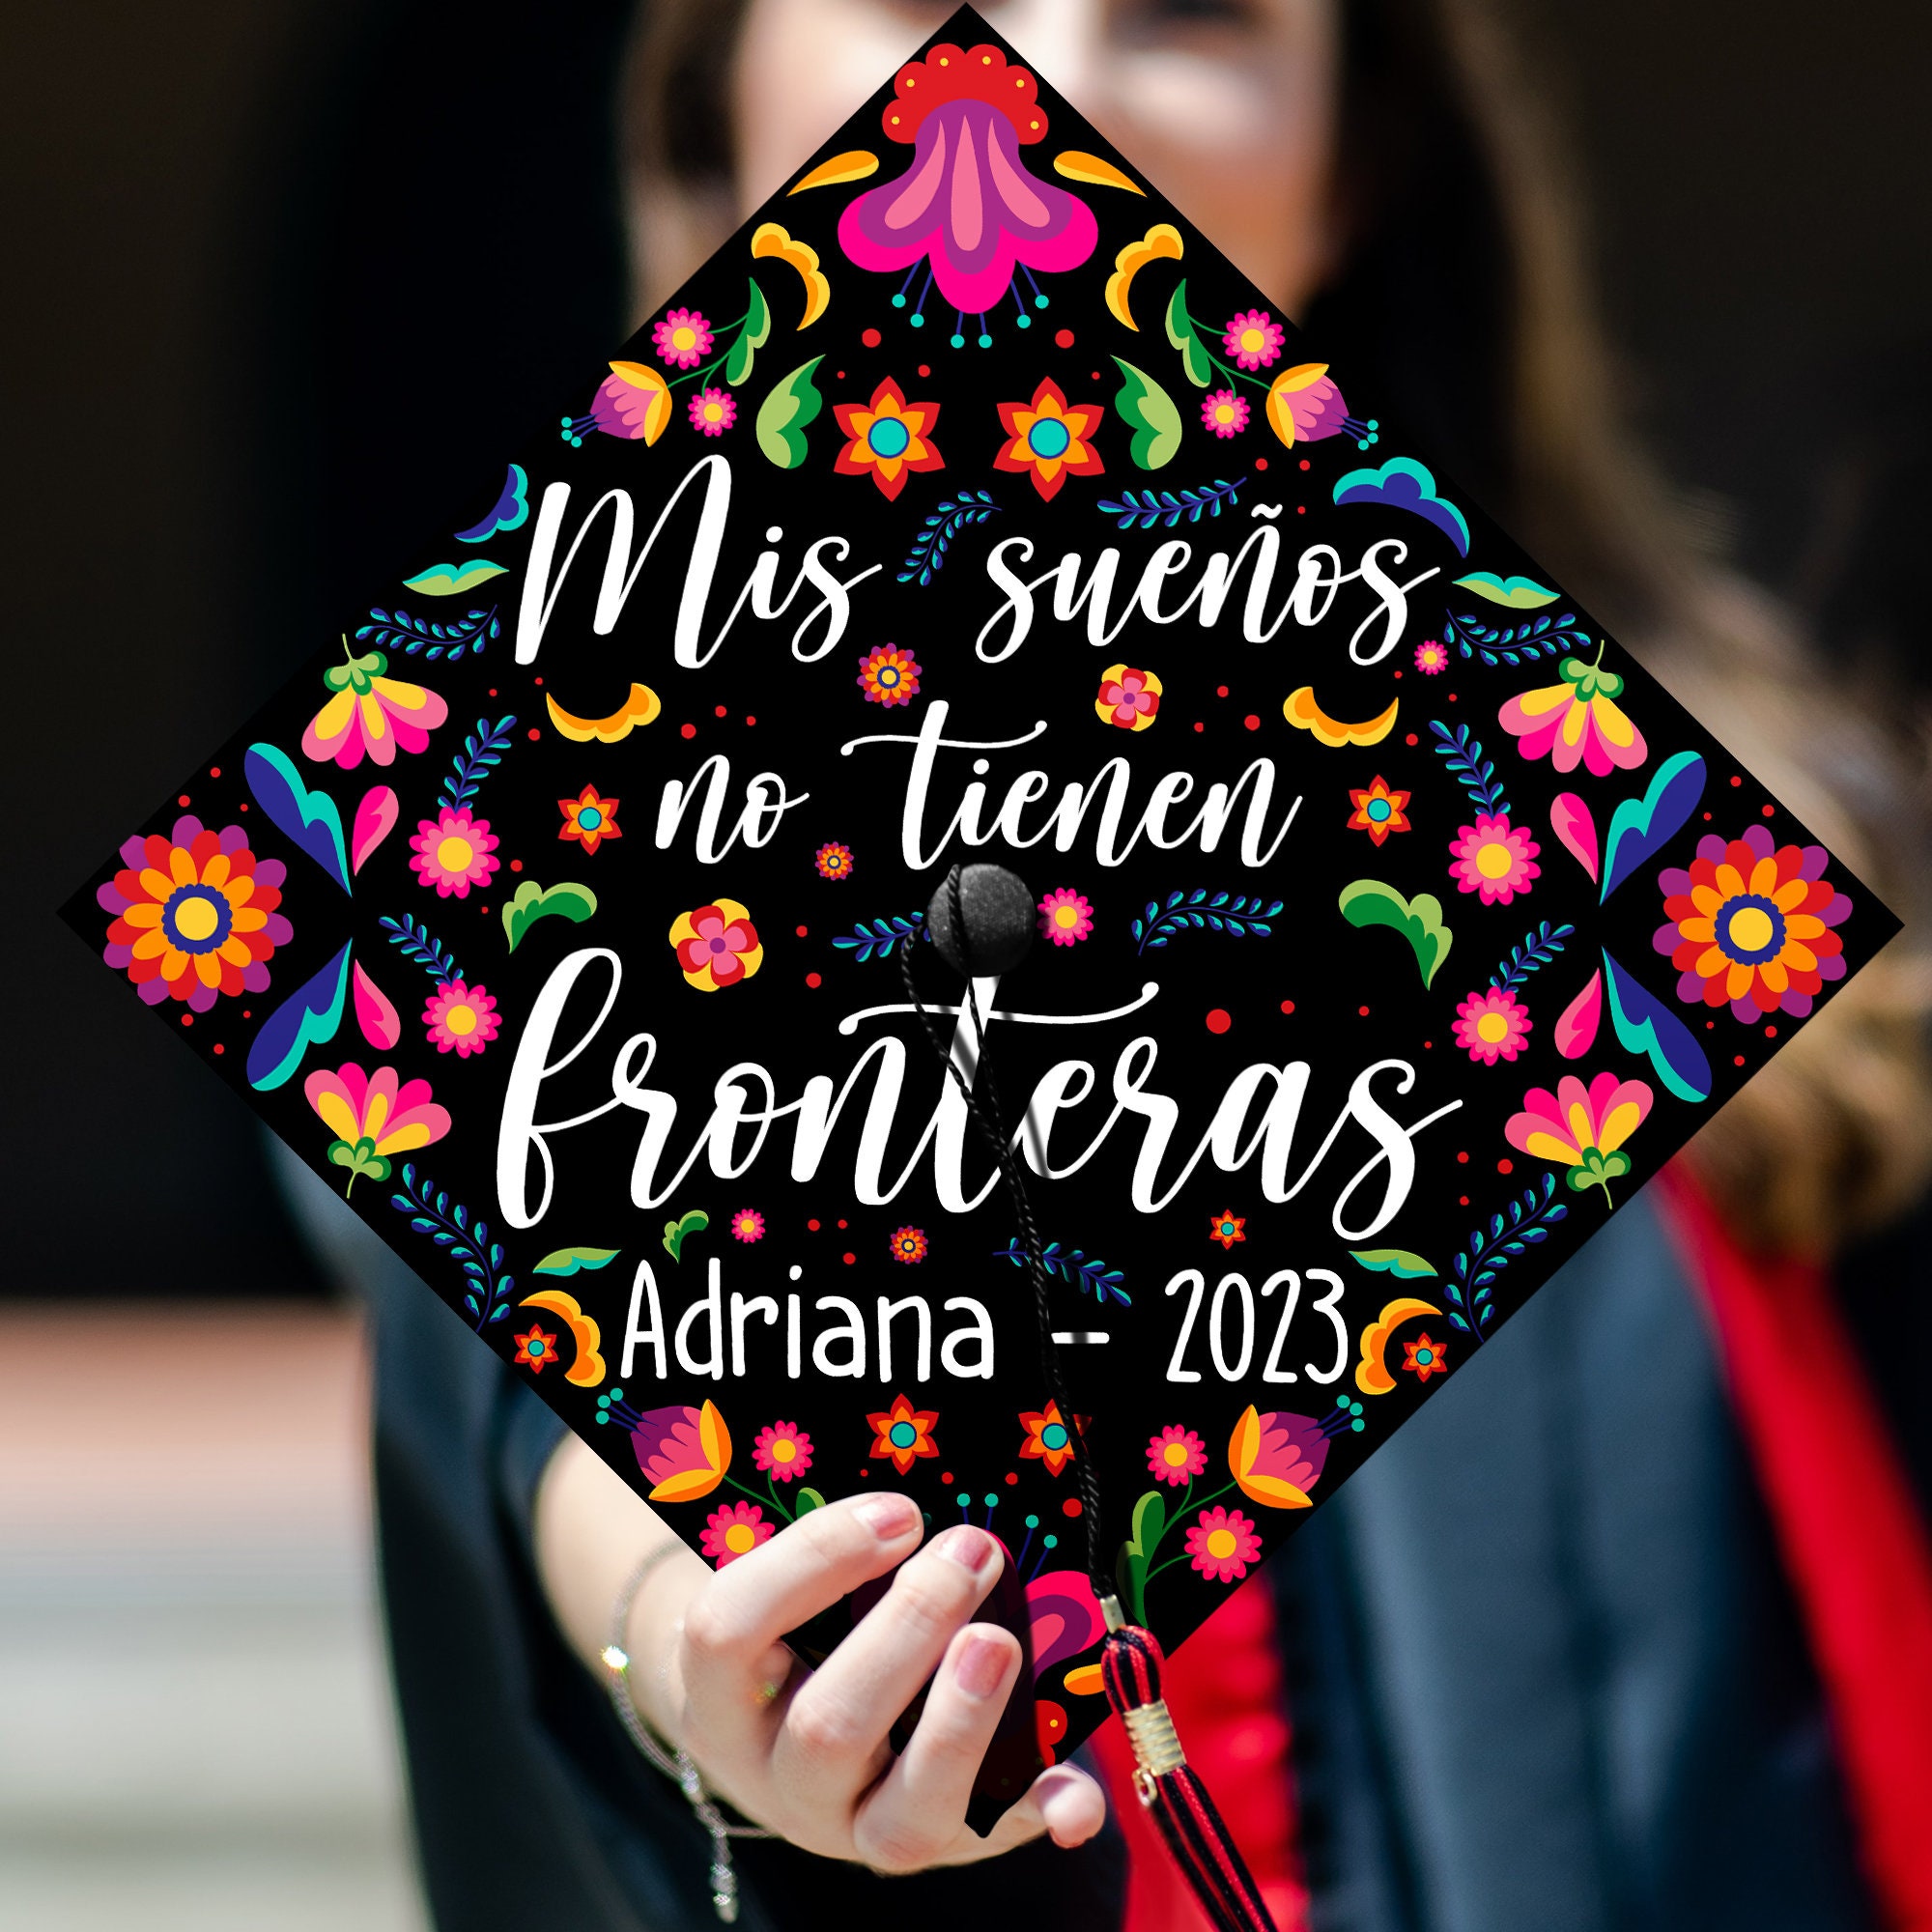 Big Dot of Happiness I Already Forgot Everything - Colorful Graduation Cap  Decorations Kit - Grad Cap Cover